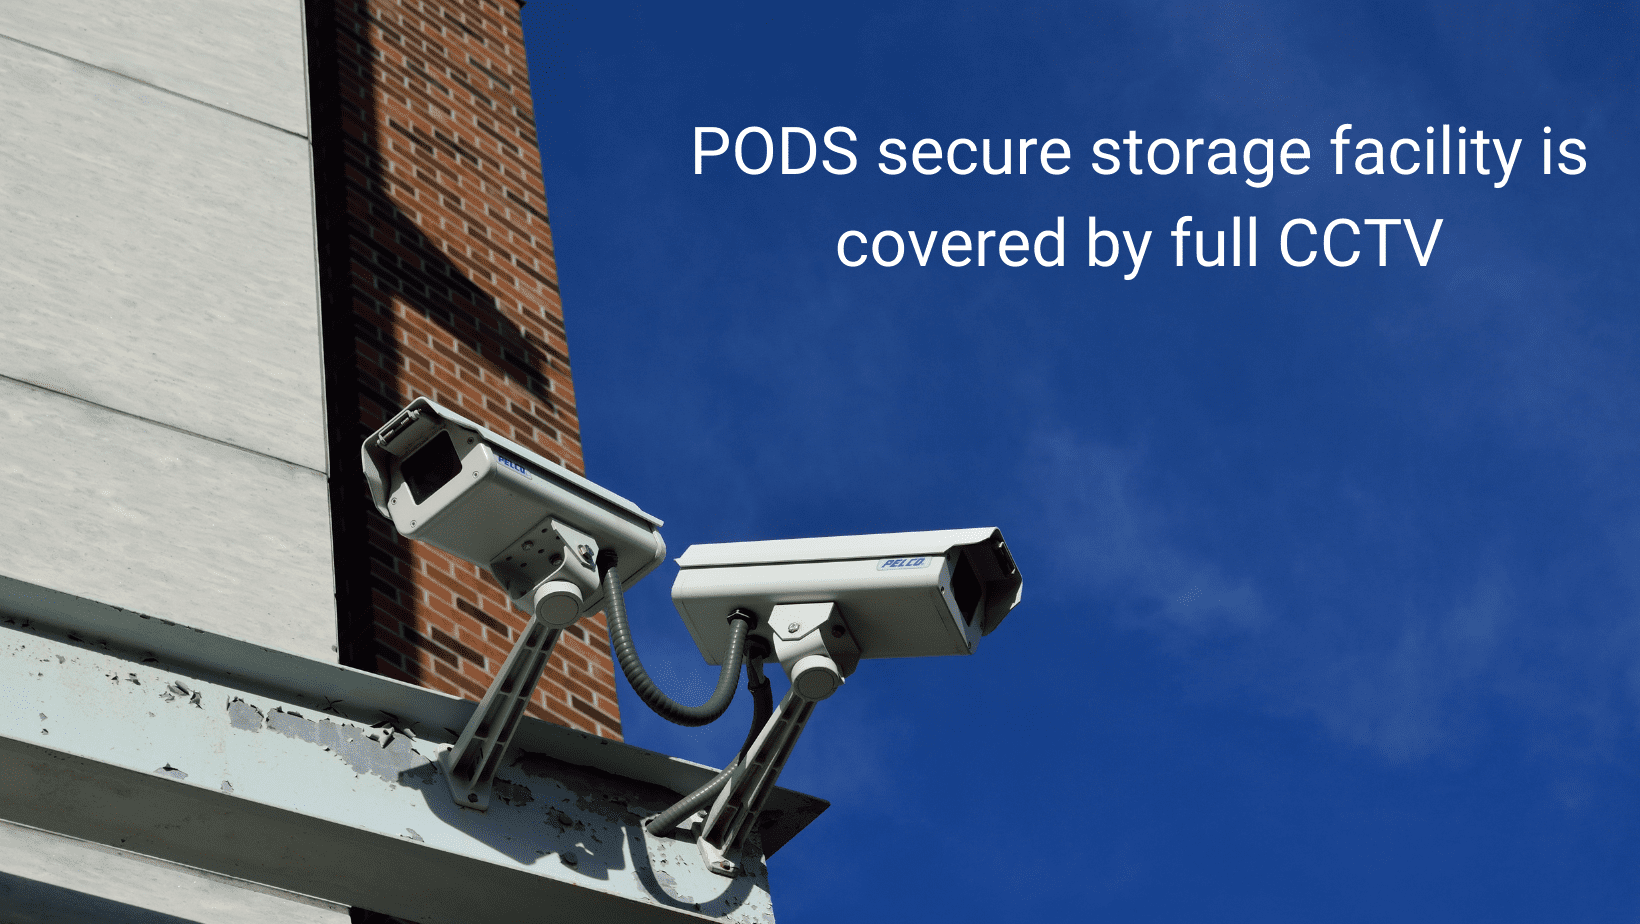  PODS secure storage facility is covered by full CCTV